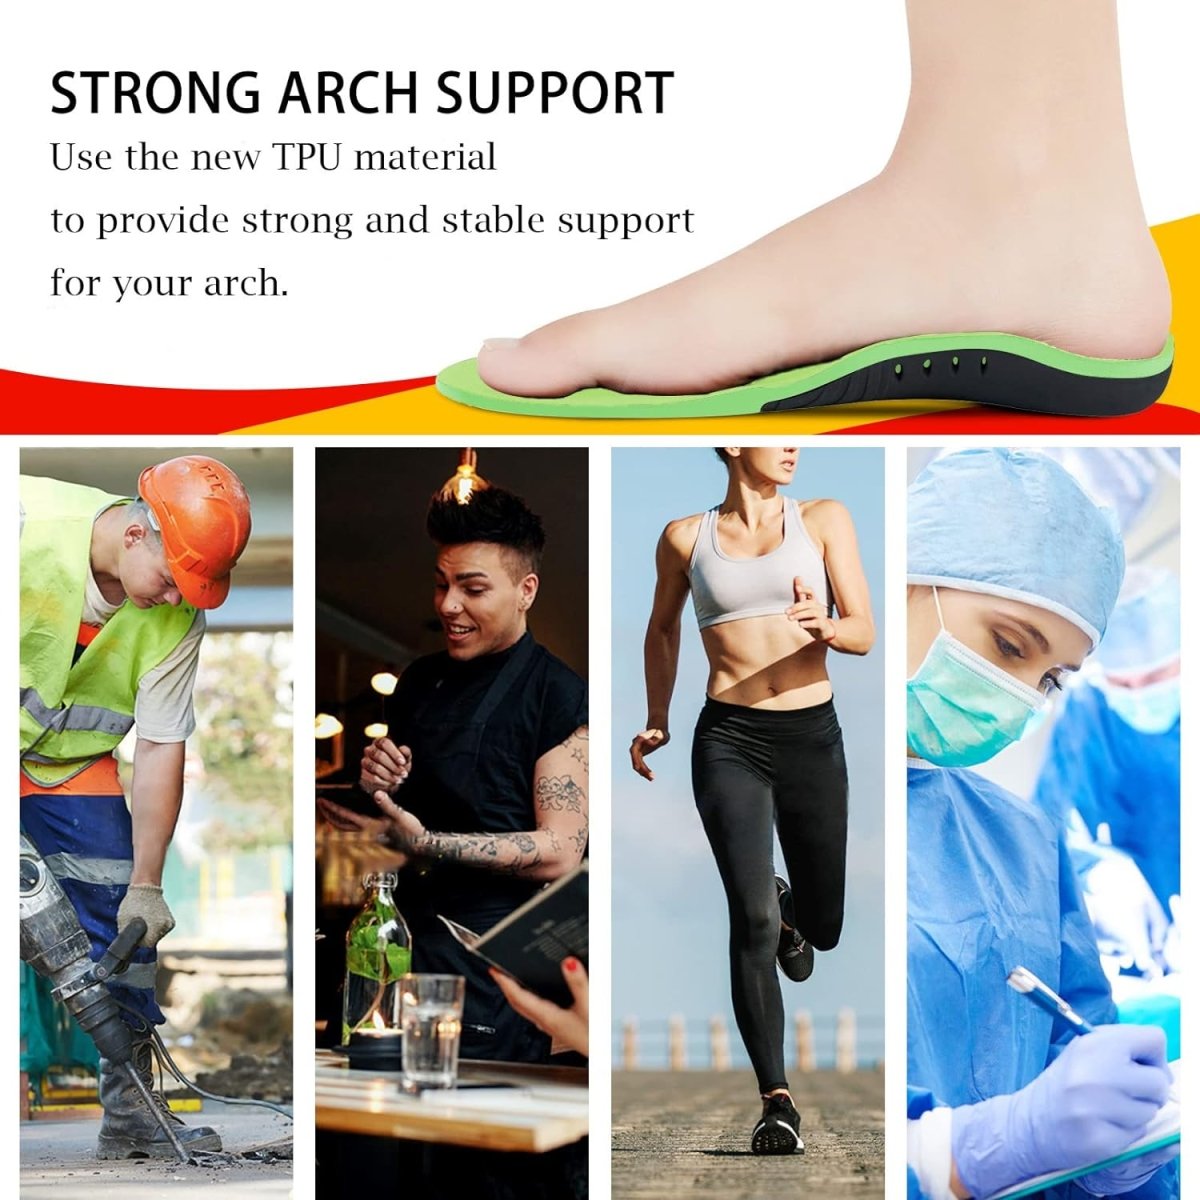 The Sole Care Plantar Fasciitis Insoles |Arch Support Insoles for Men Women| Flat Feet Relief Pain Orthotics Shoe Insole- #Royalkart#orthotic shoe insole